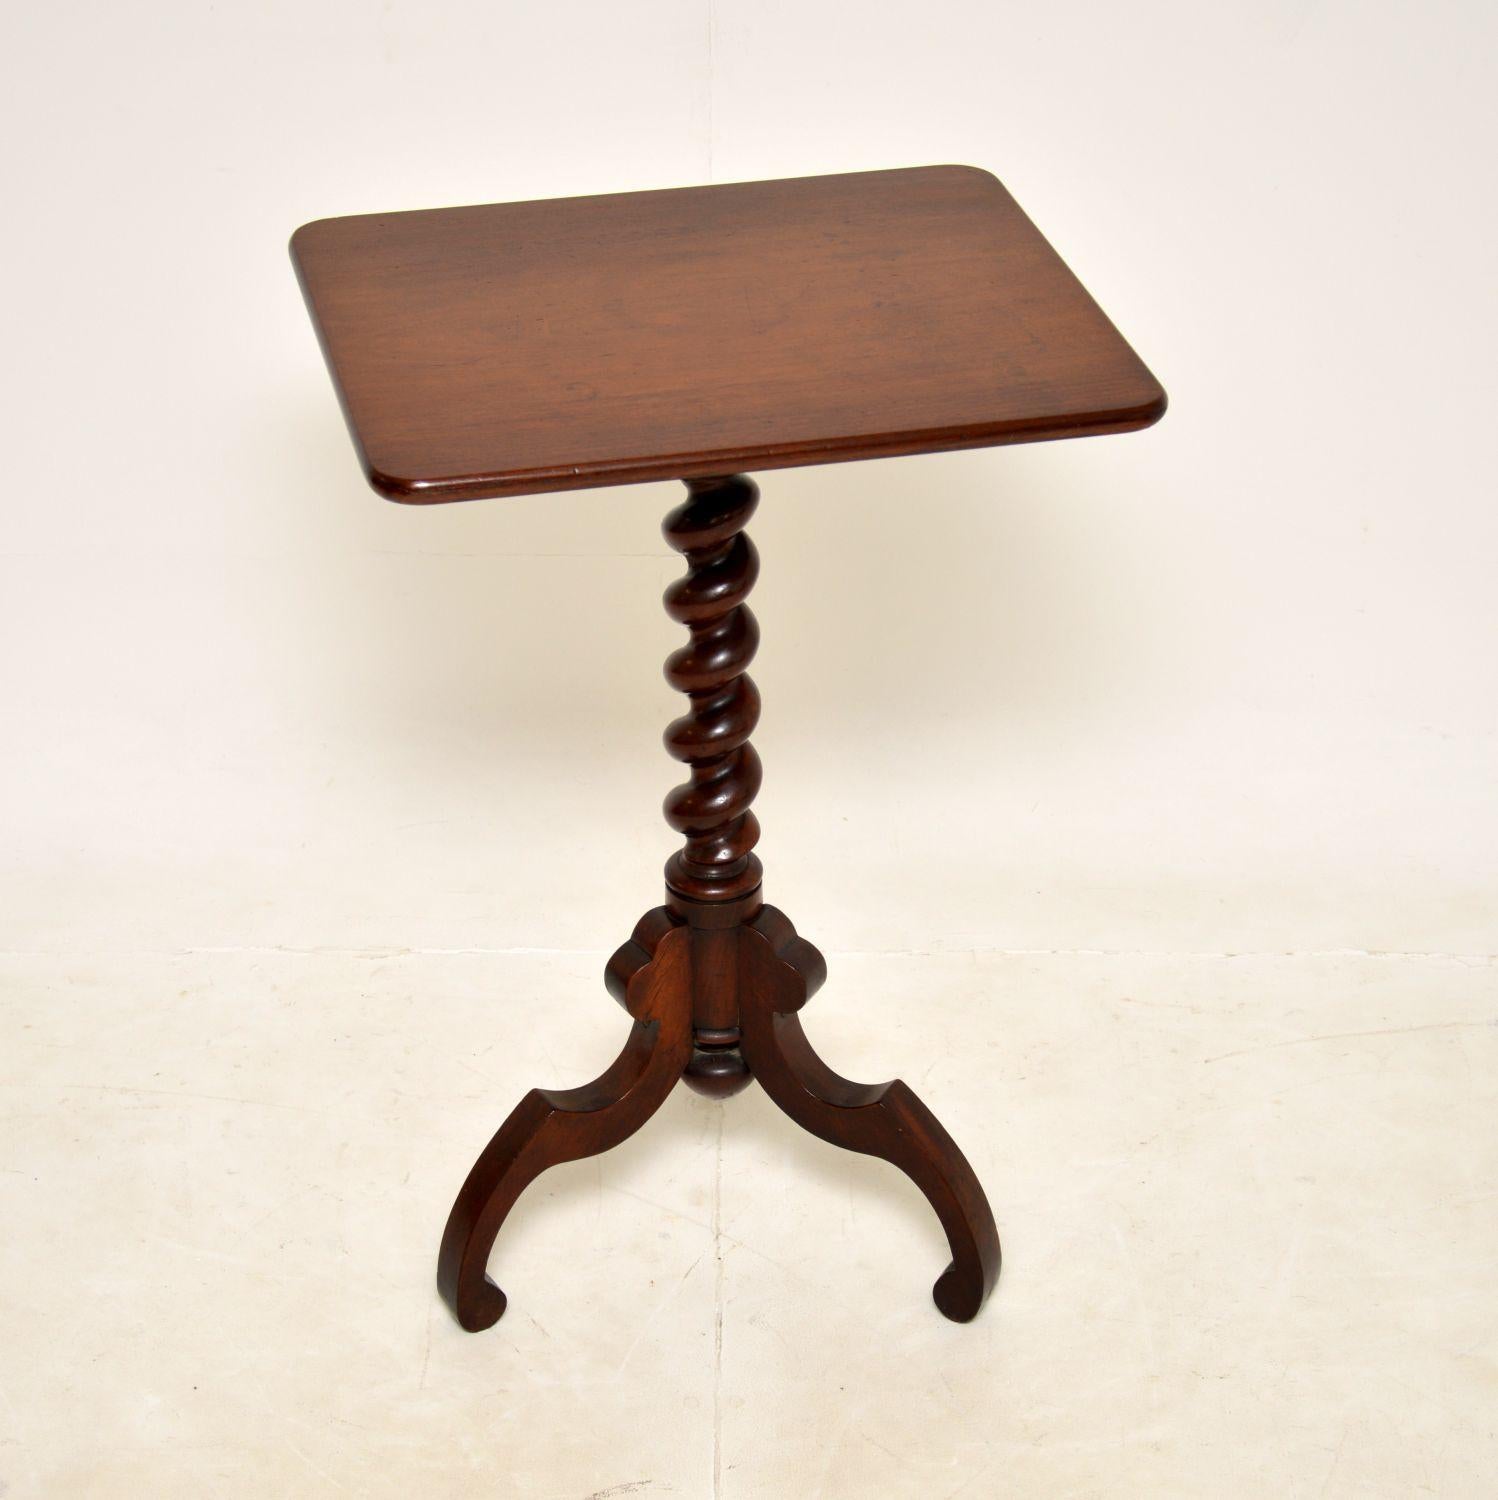 A wonderful antique Victorian occasional side table. This was made in England, it dates from around the 1850-1870 period.

It is of superb quality, the rectangular top is supported by a barley twist column, which sits on a carved tripod base.

We